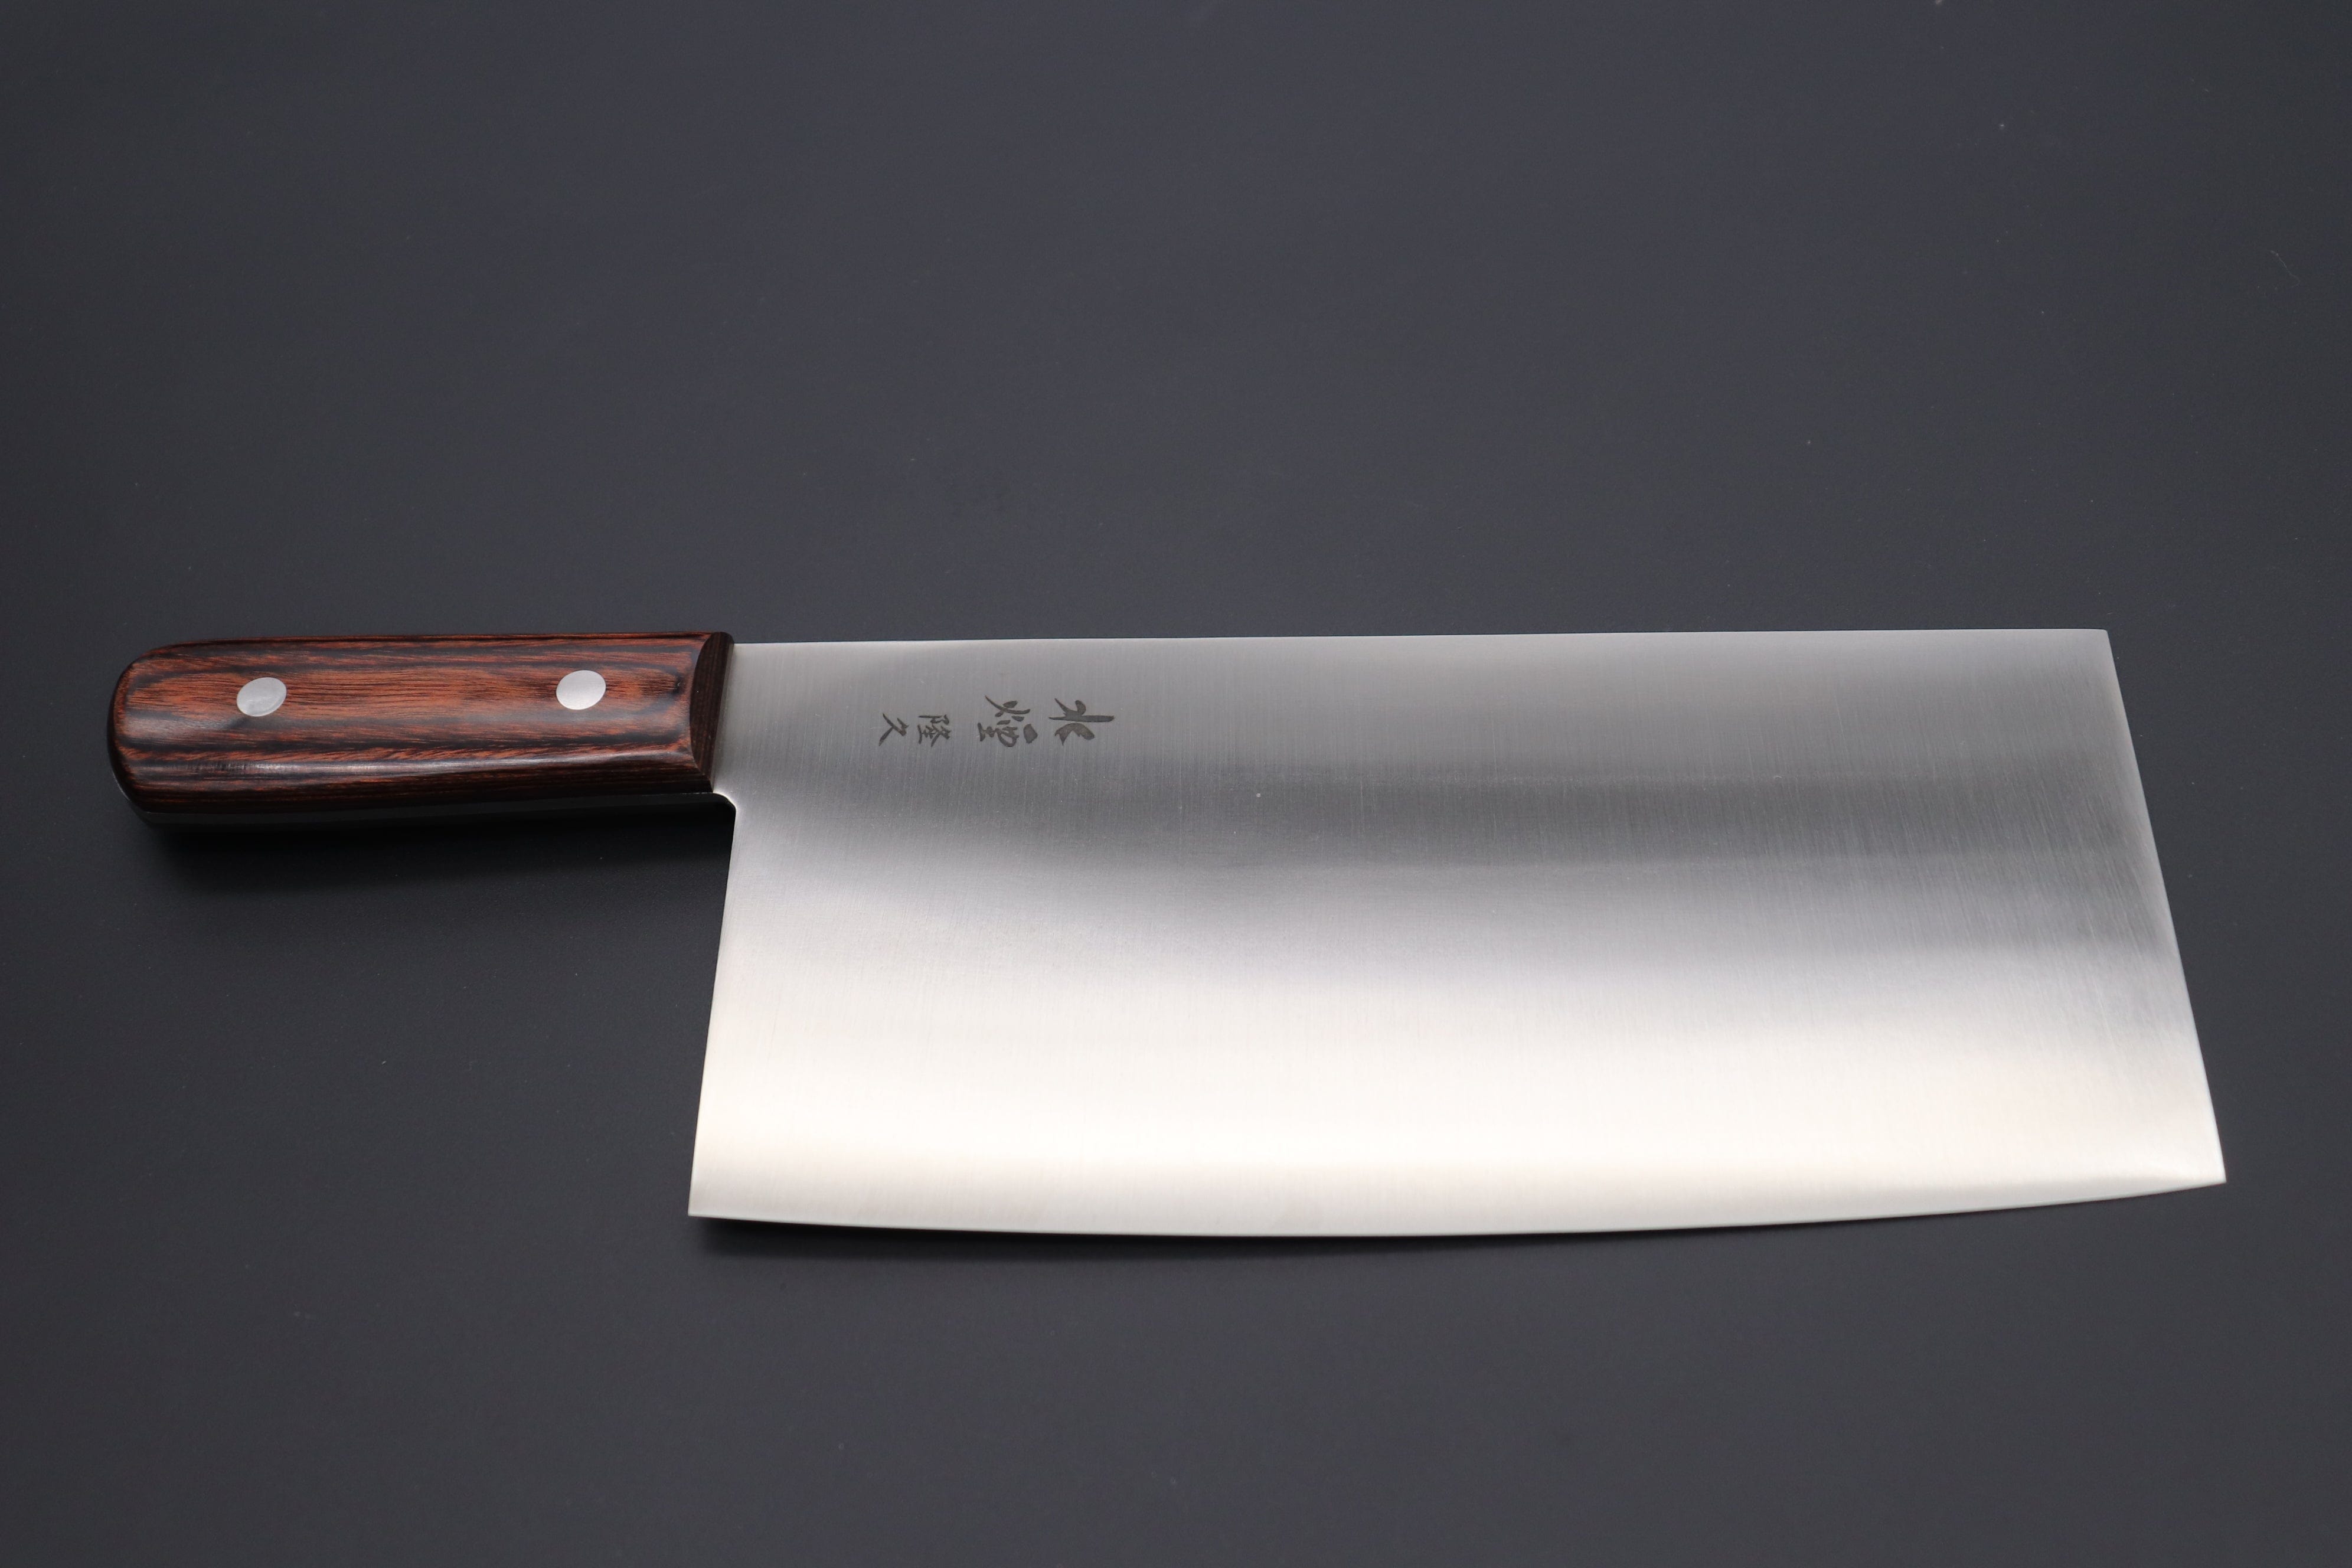 https://japanesechefsknife.com/cdn/shop/files/others-chinese-cleaver-suien-vg-10-stainless-steel-chinese-cleaver-220mm-8-6-42391948689691.jpg?v=1692330695